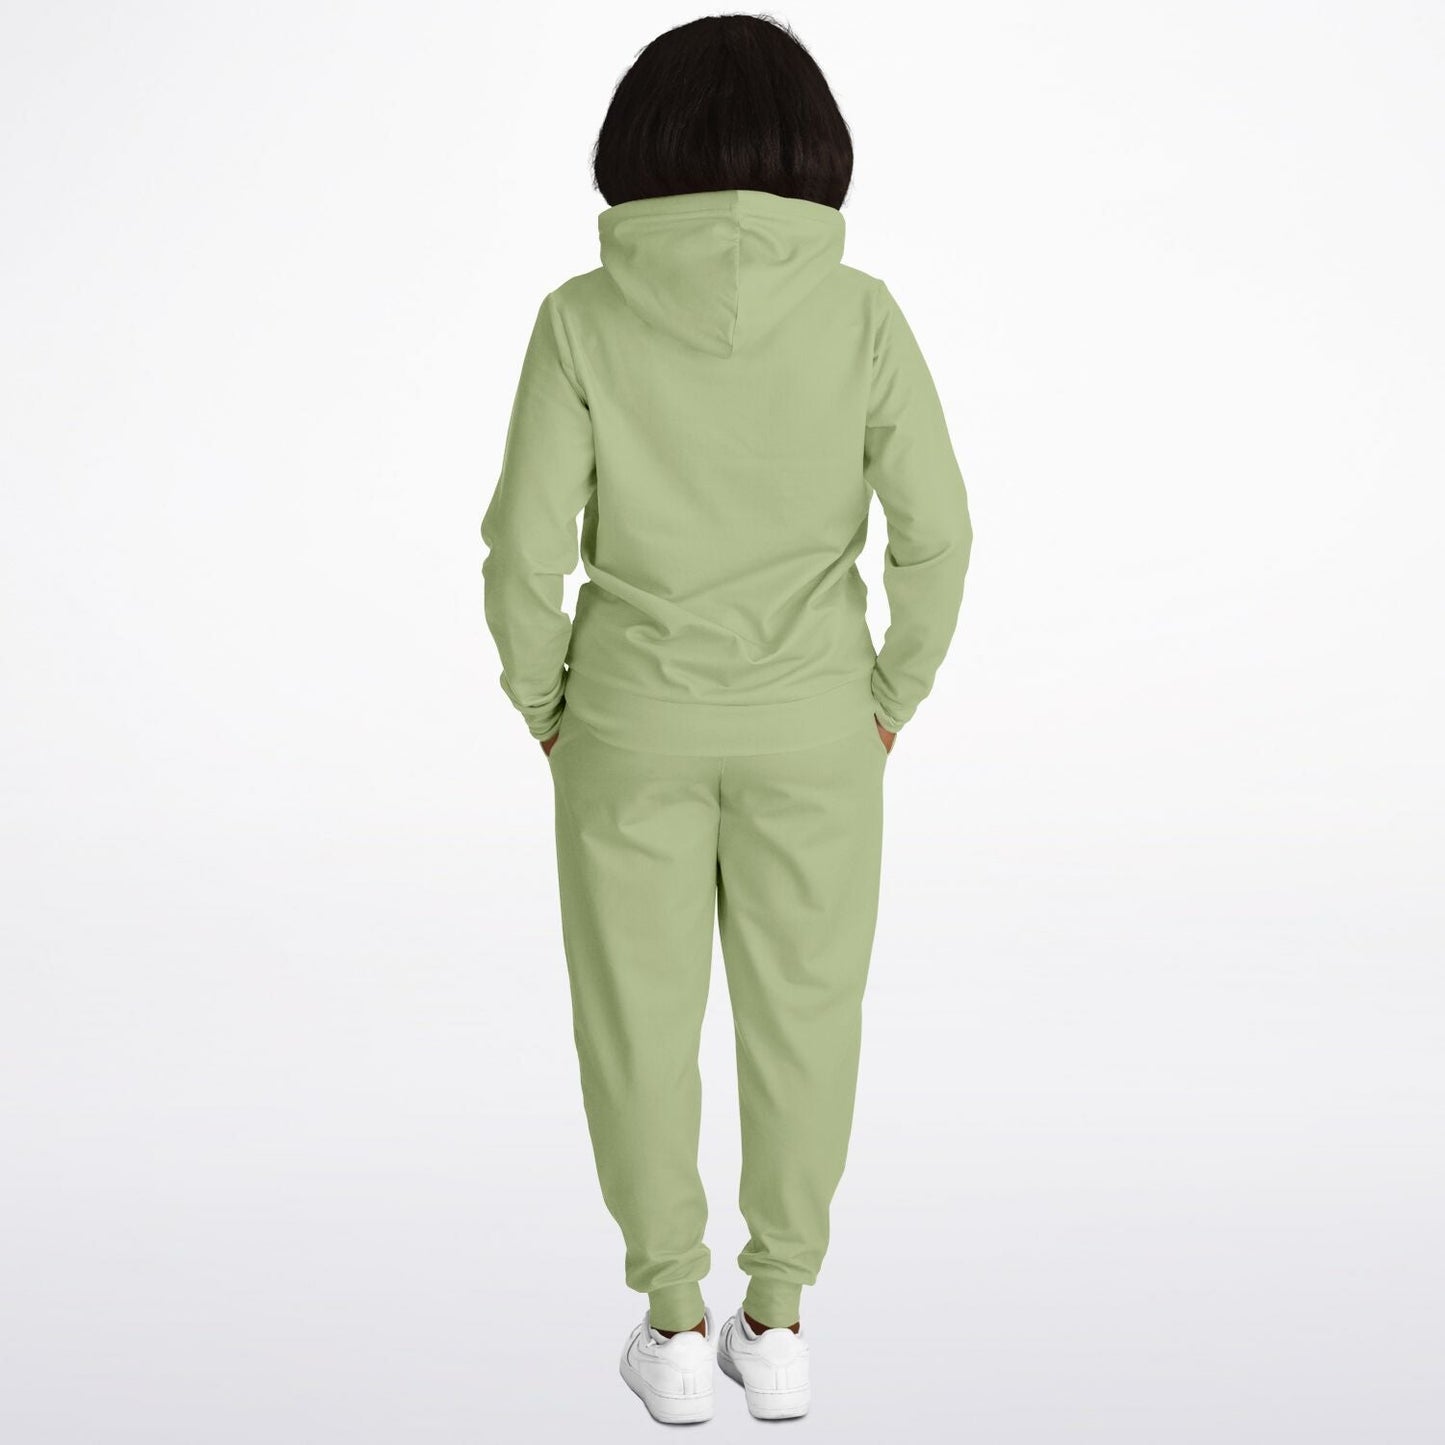 Vintage Dusky Green Women's Hoodie and Joggers Set - Sport Finesse